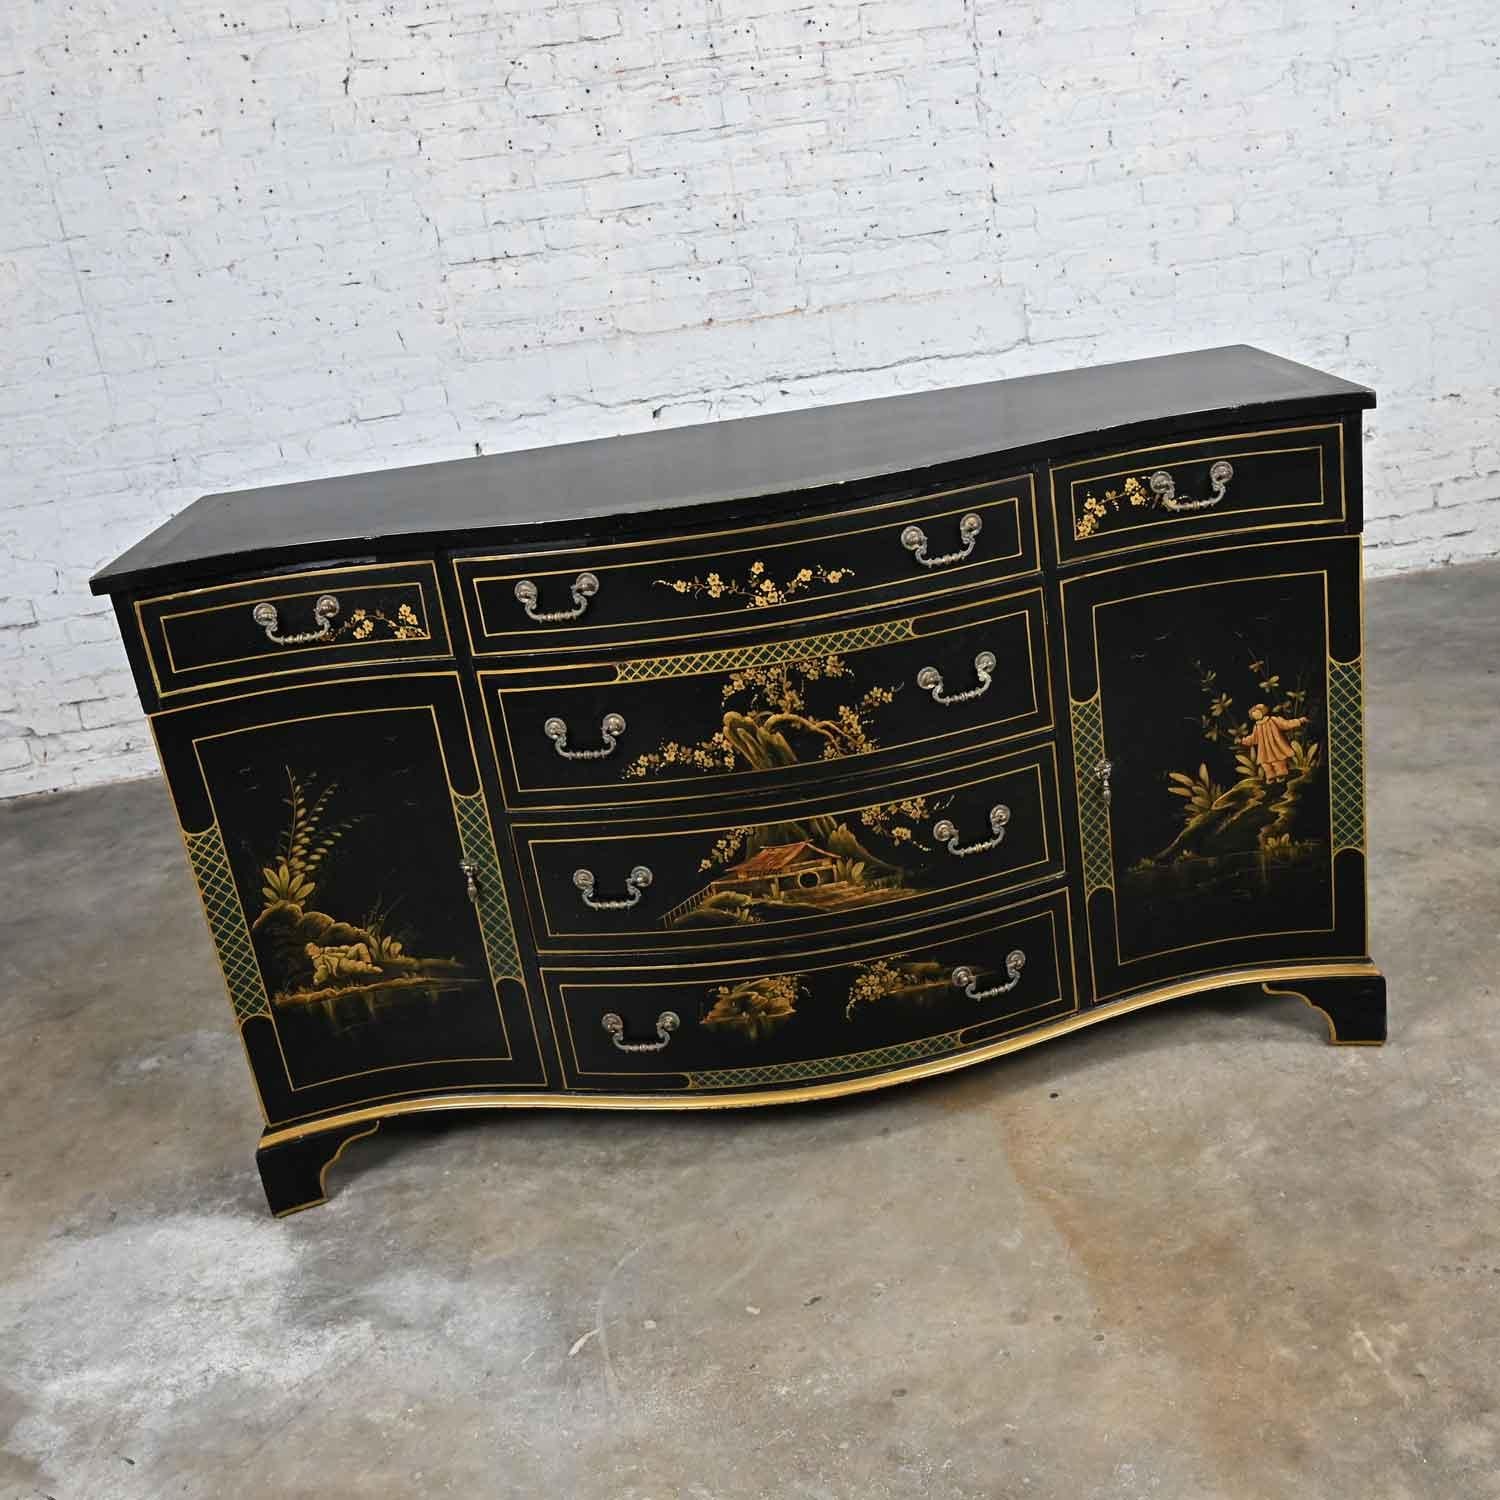 American chinoiserie Regency Style Union National Black & Gilt Buffet Sideboard